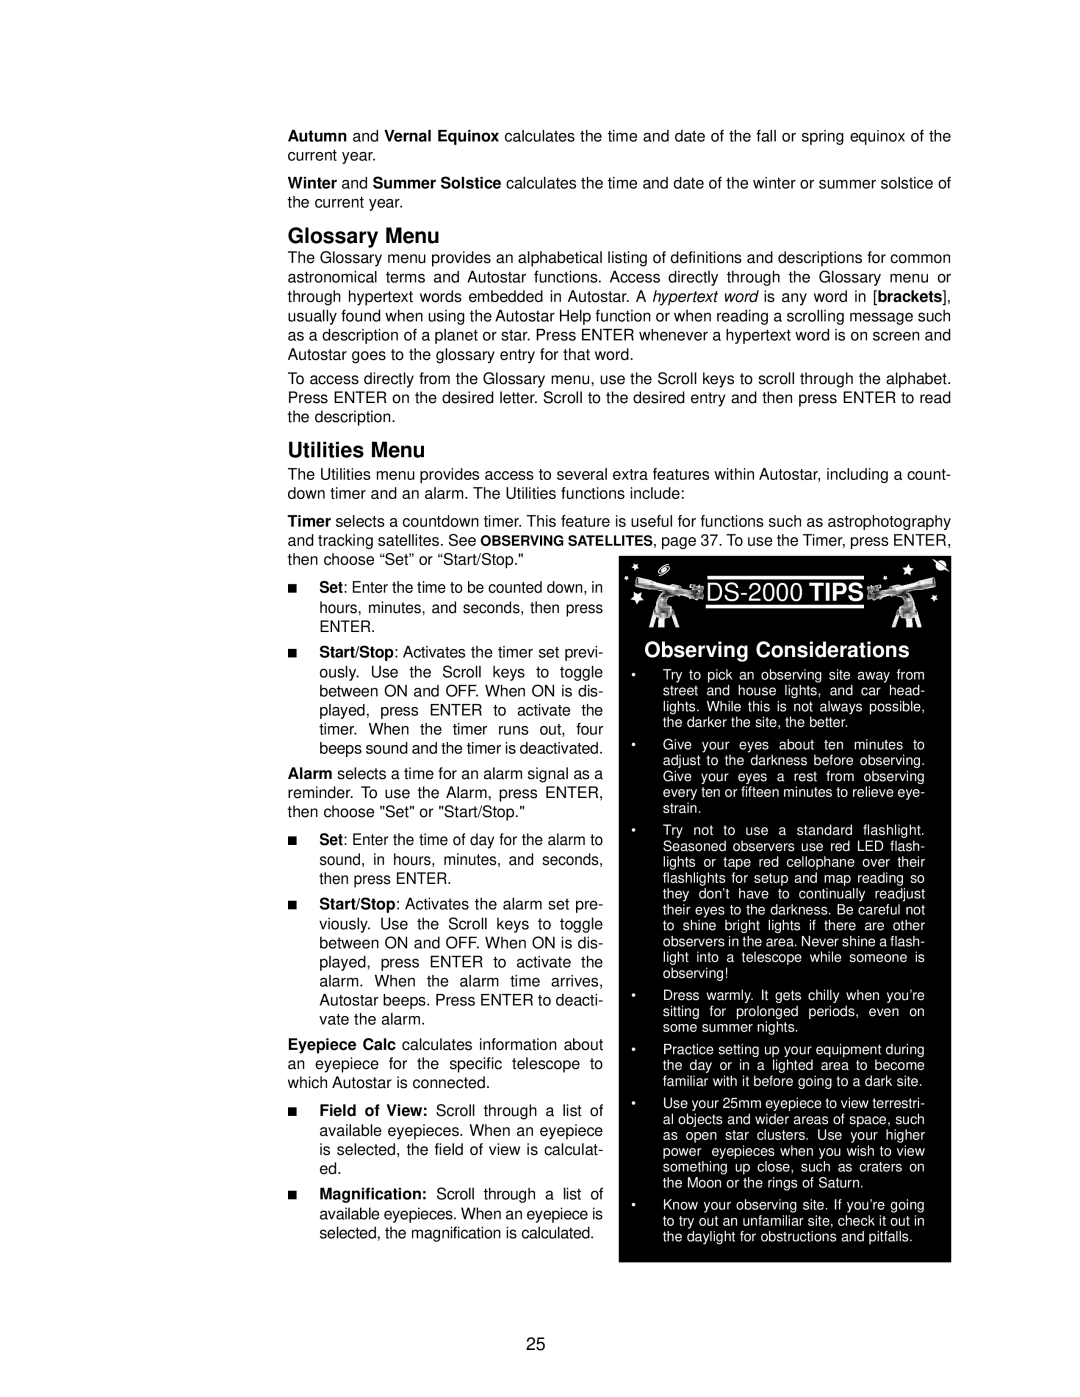 Meade instruction manual Glossary Menu, Utilities Menu, Observing Considerations, DS-2000 TIPS 